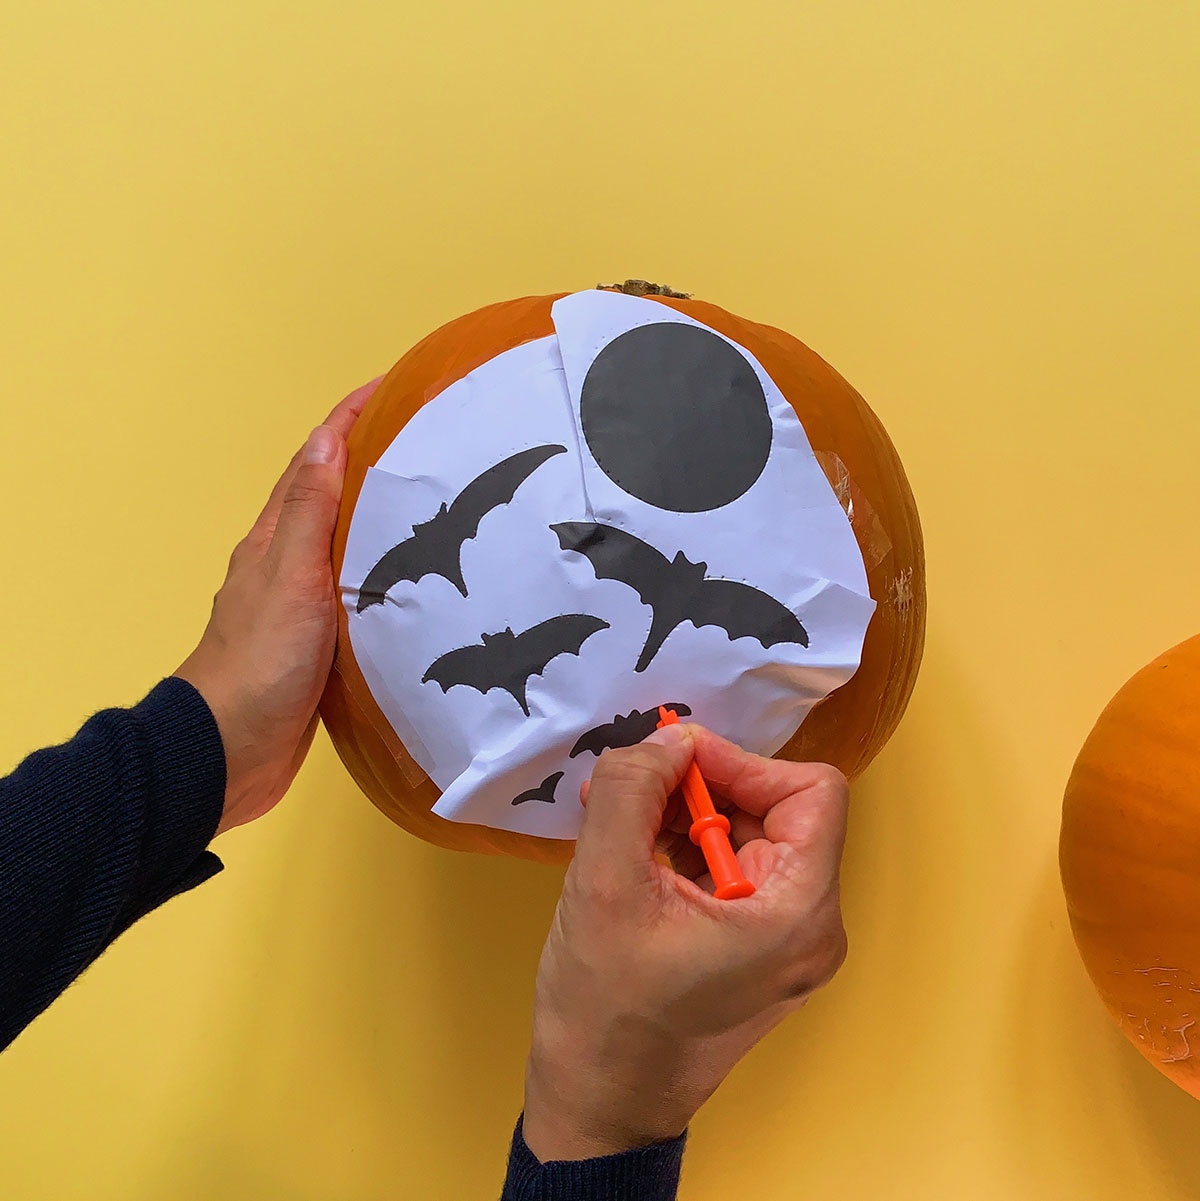 A photo of a stencil taped to a pumpkin and hands using a poker to poke the design out